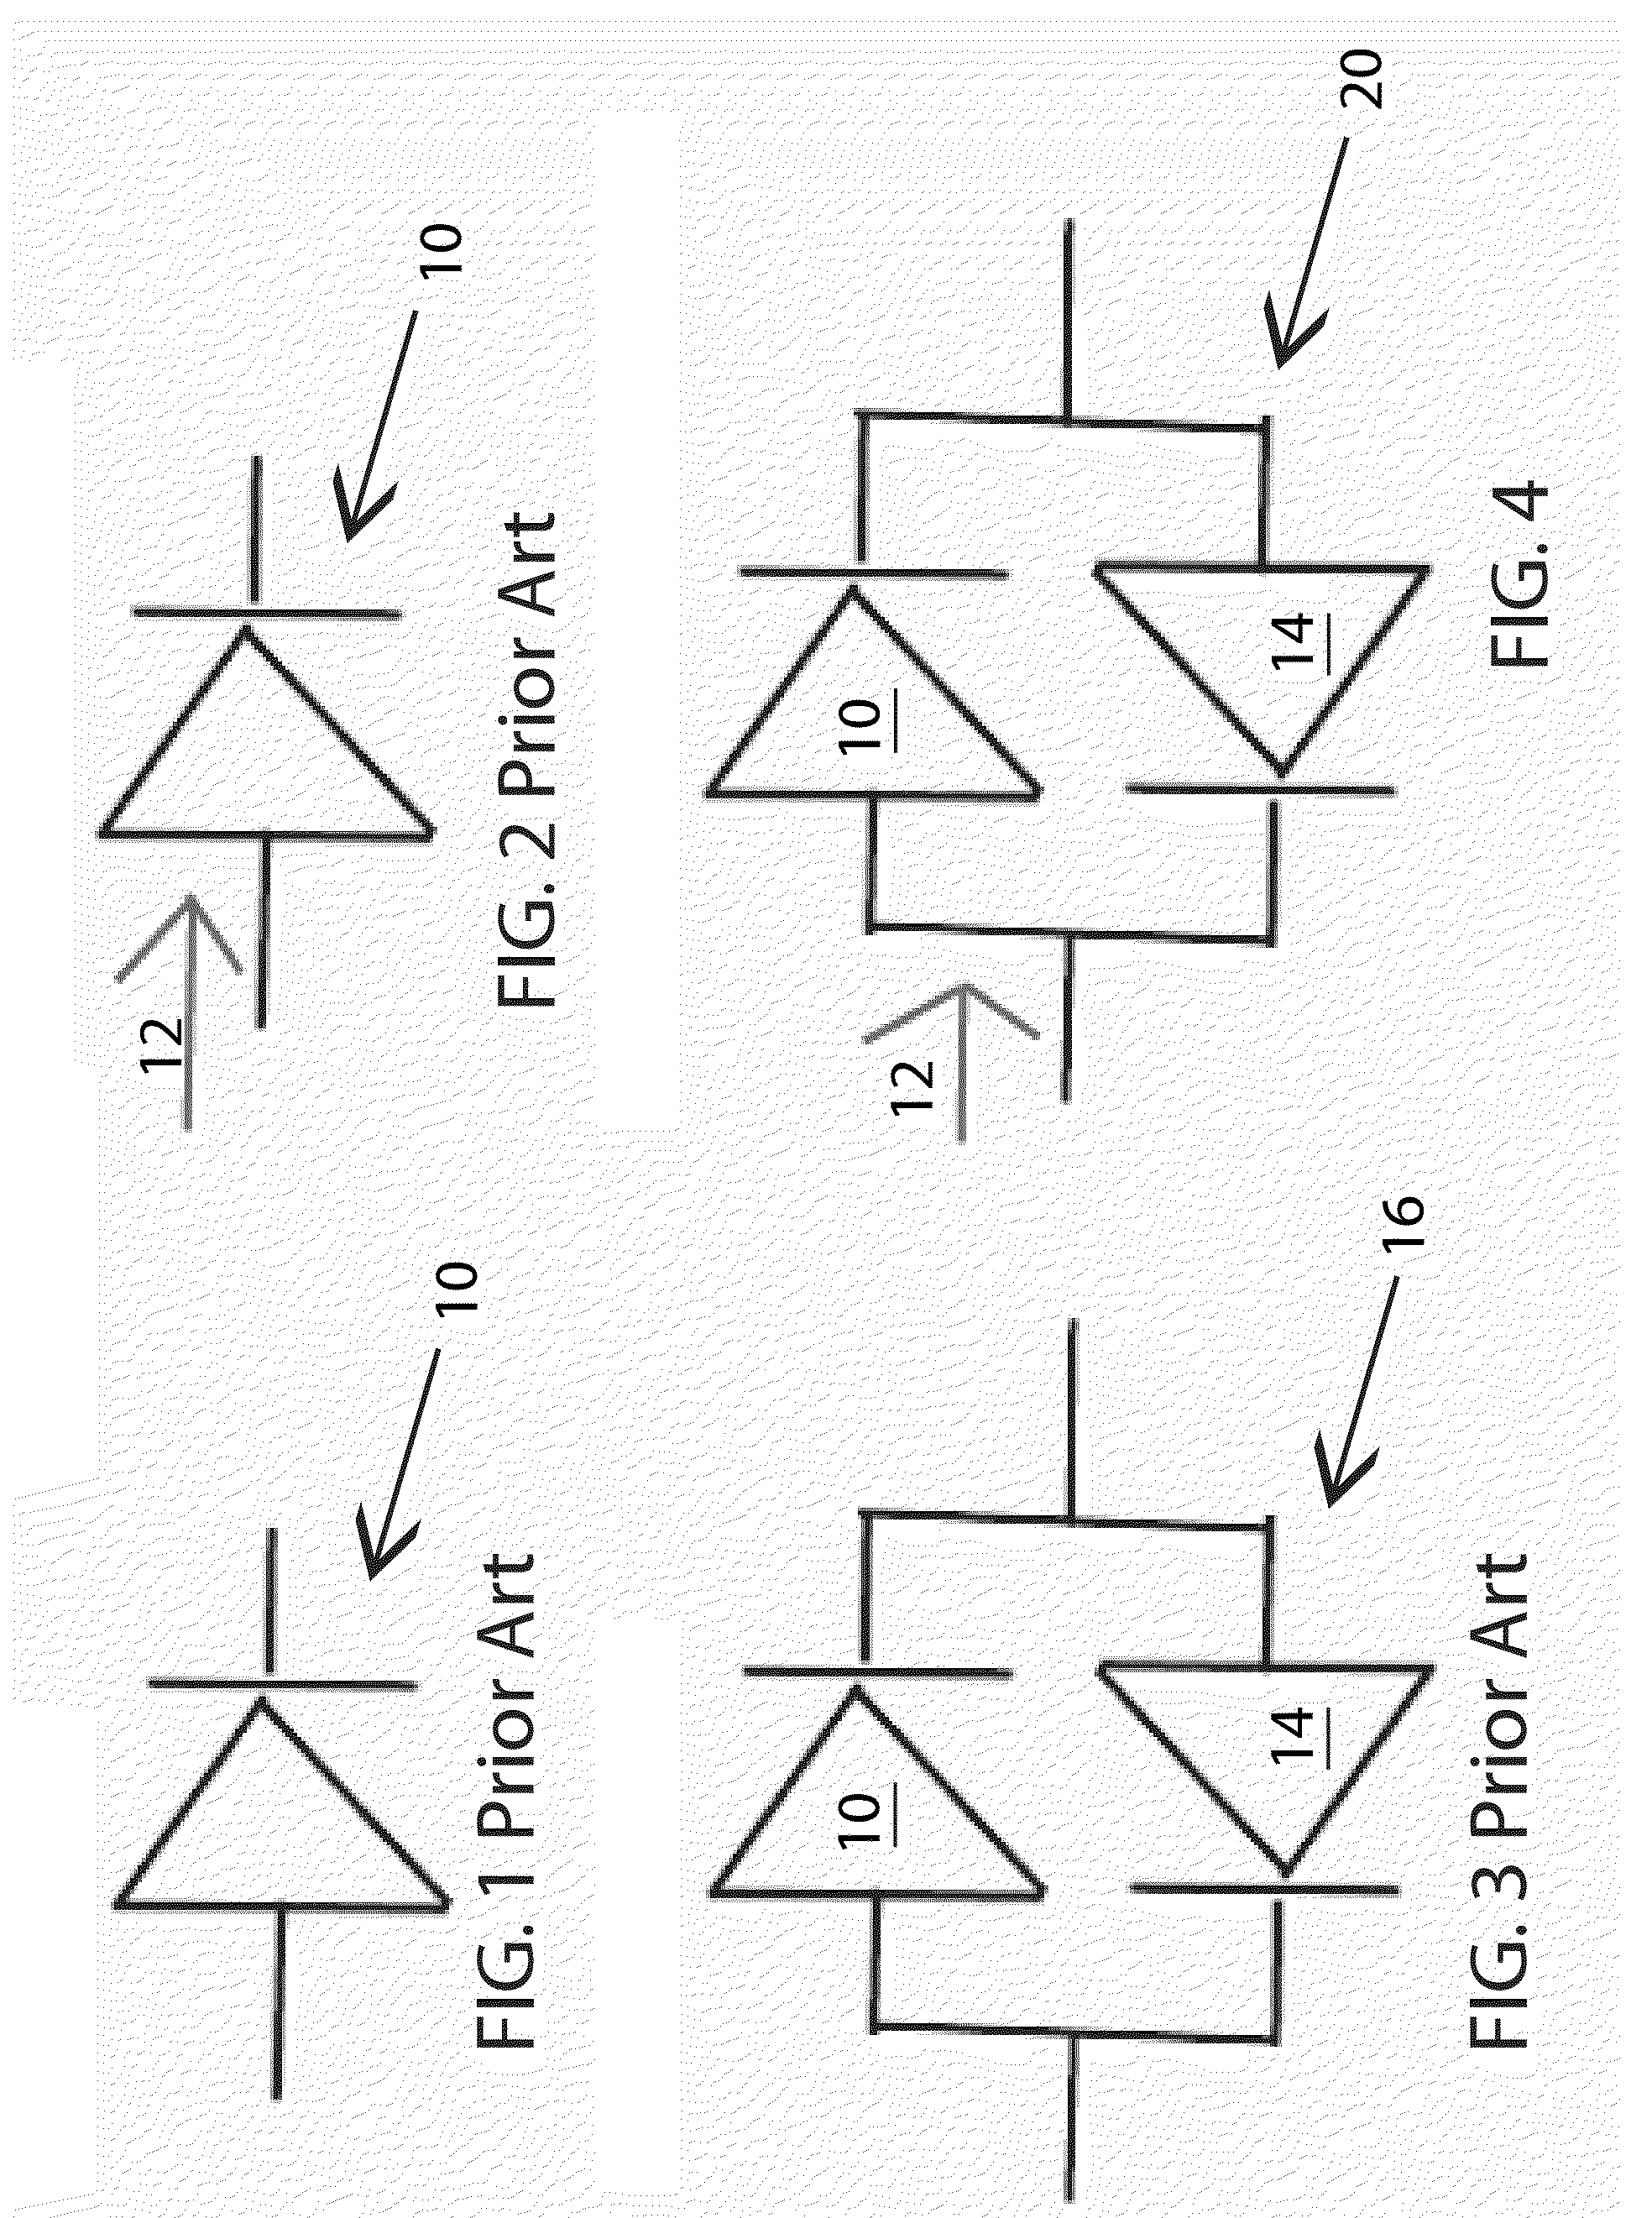 Methods of Circuit Construction to Improve Diode Performance